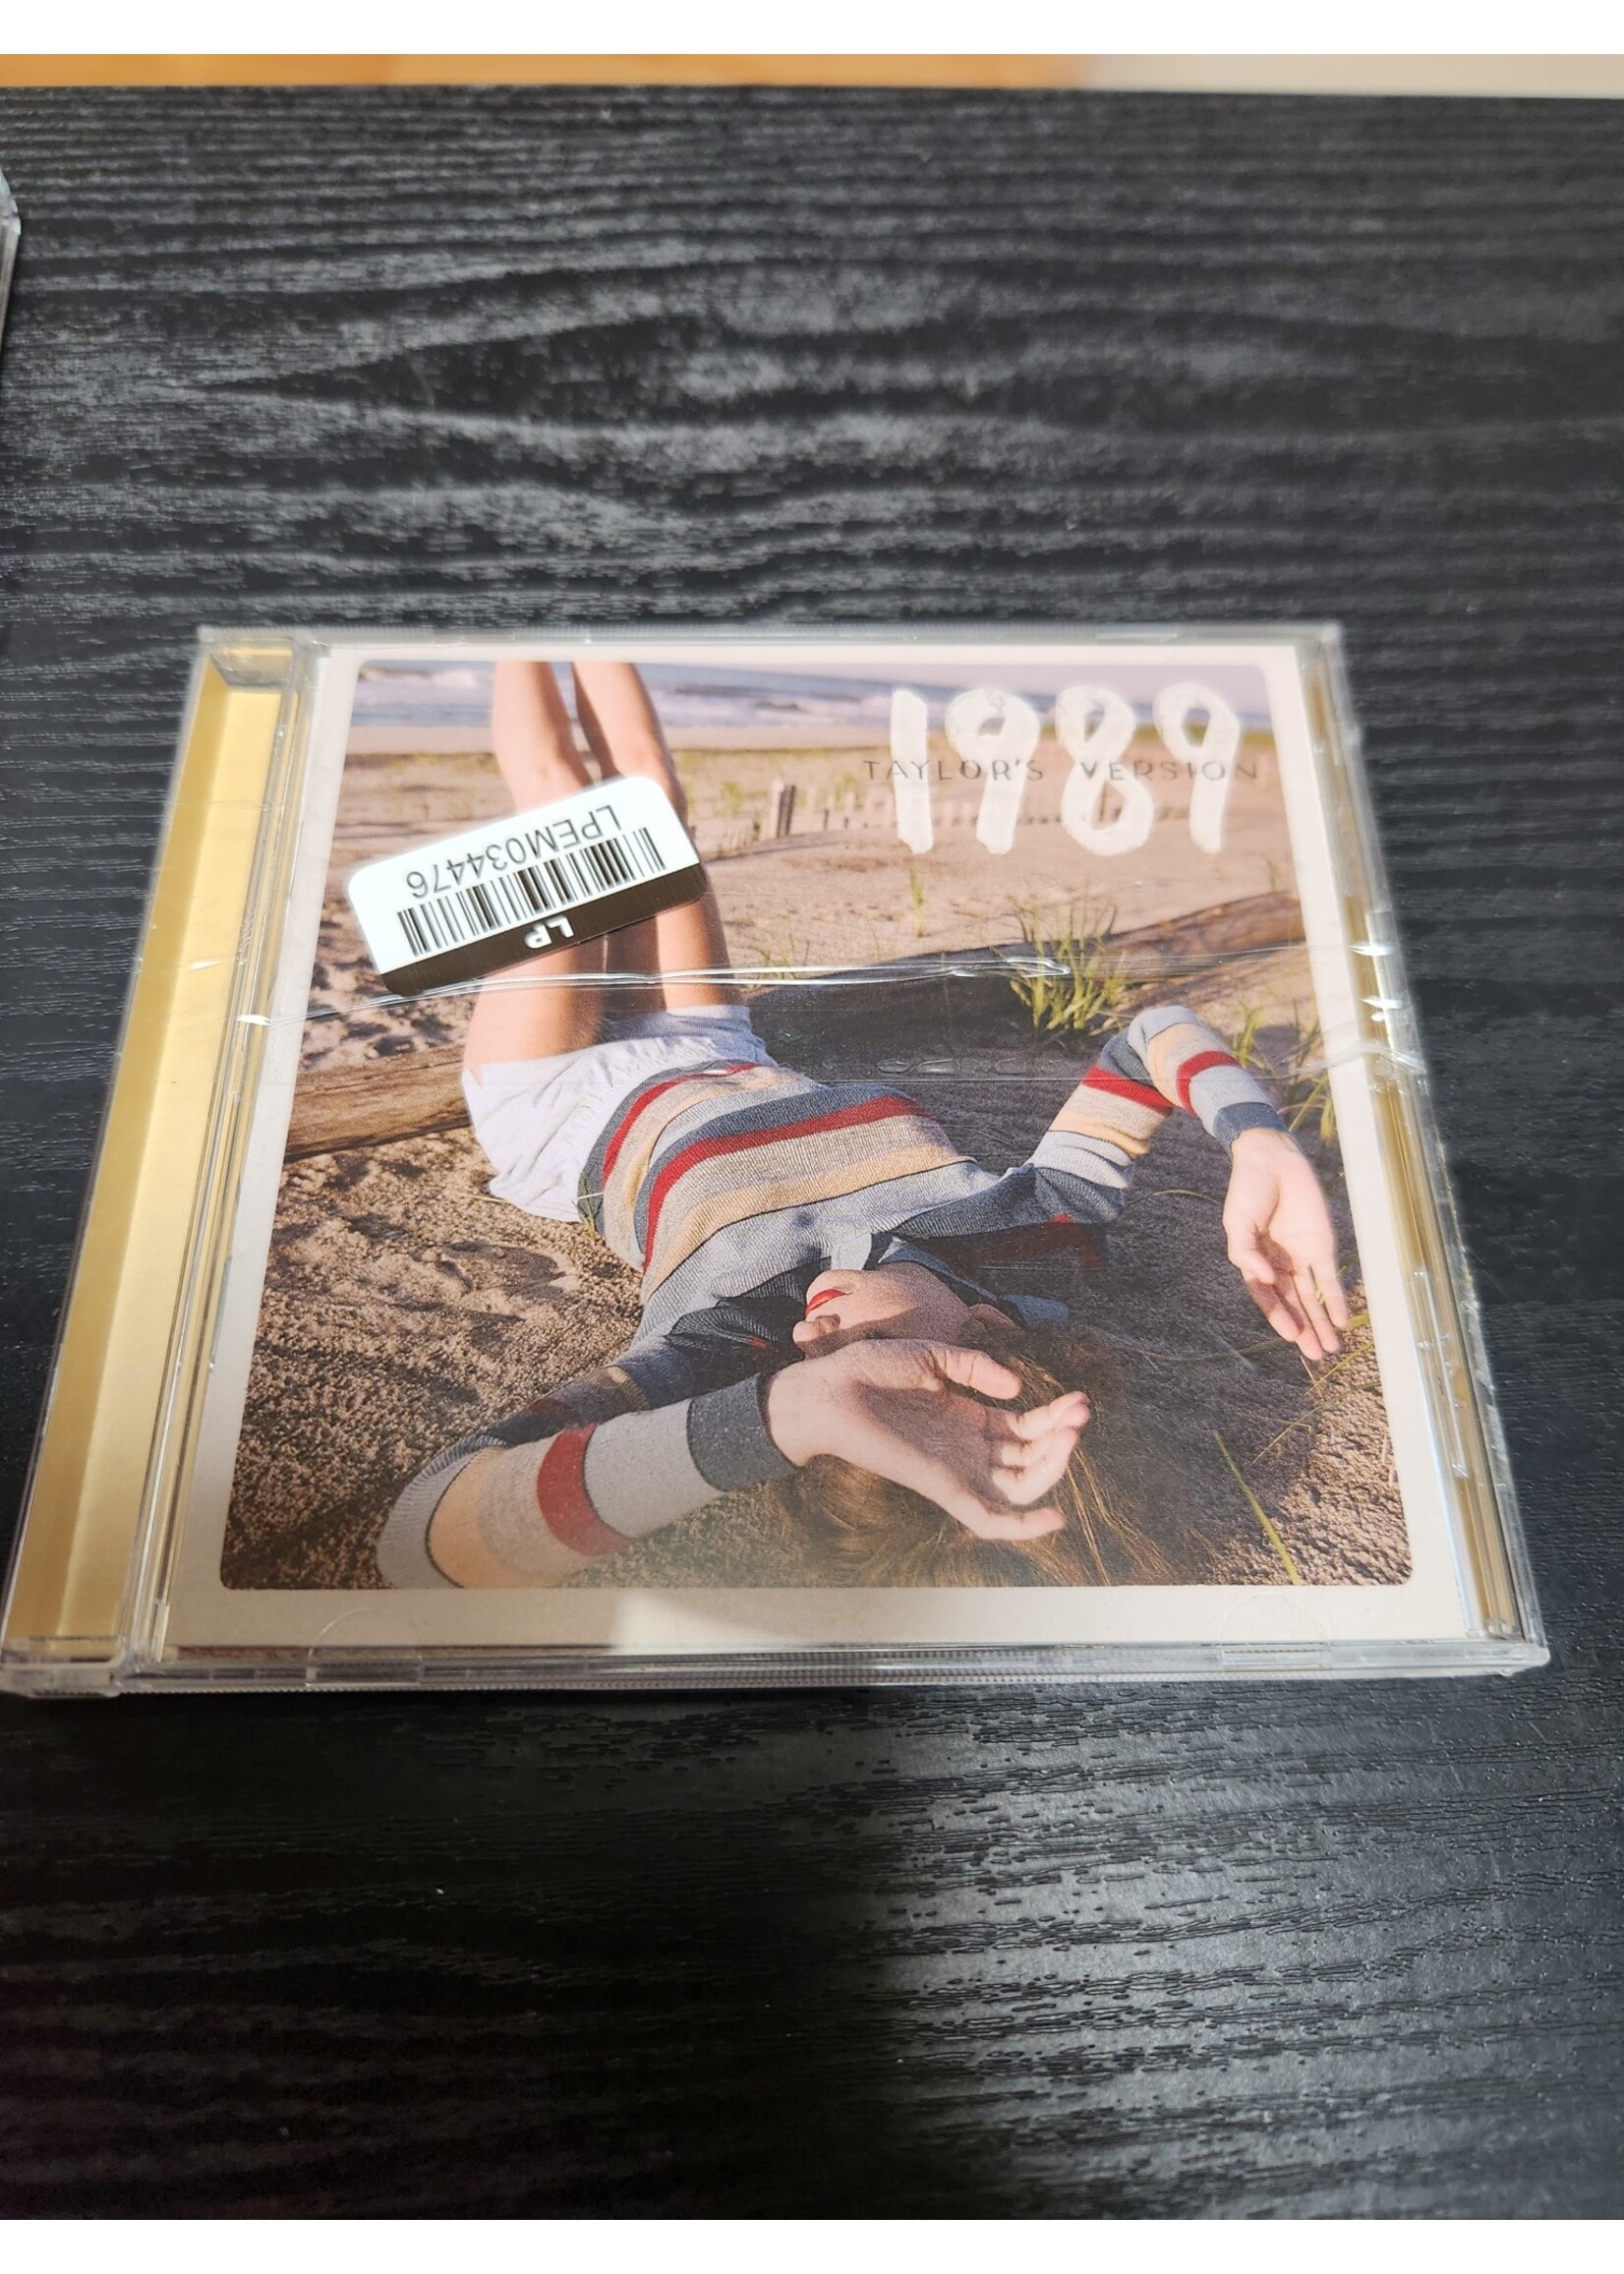 *Open/Cracked Case* Taylor Swift - 1989 (Taylor's Version) Sunrise Boulevard Yellow CD Deluxe Poster Edition (Target Exclusive)